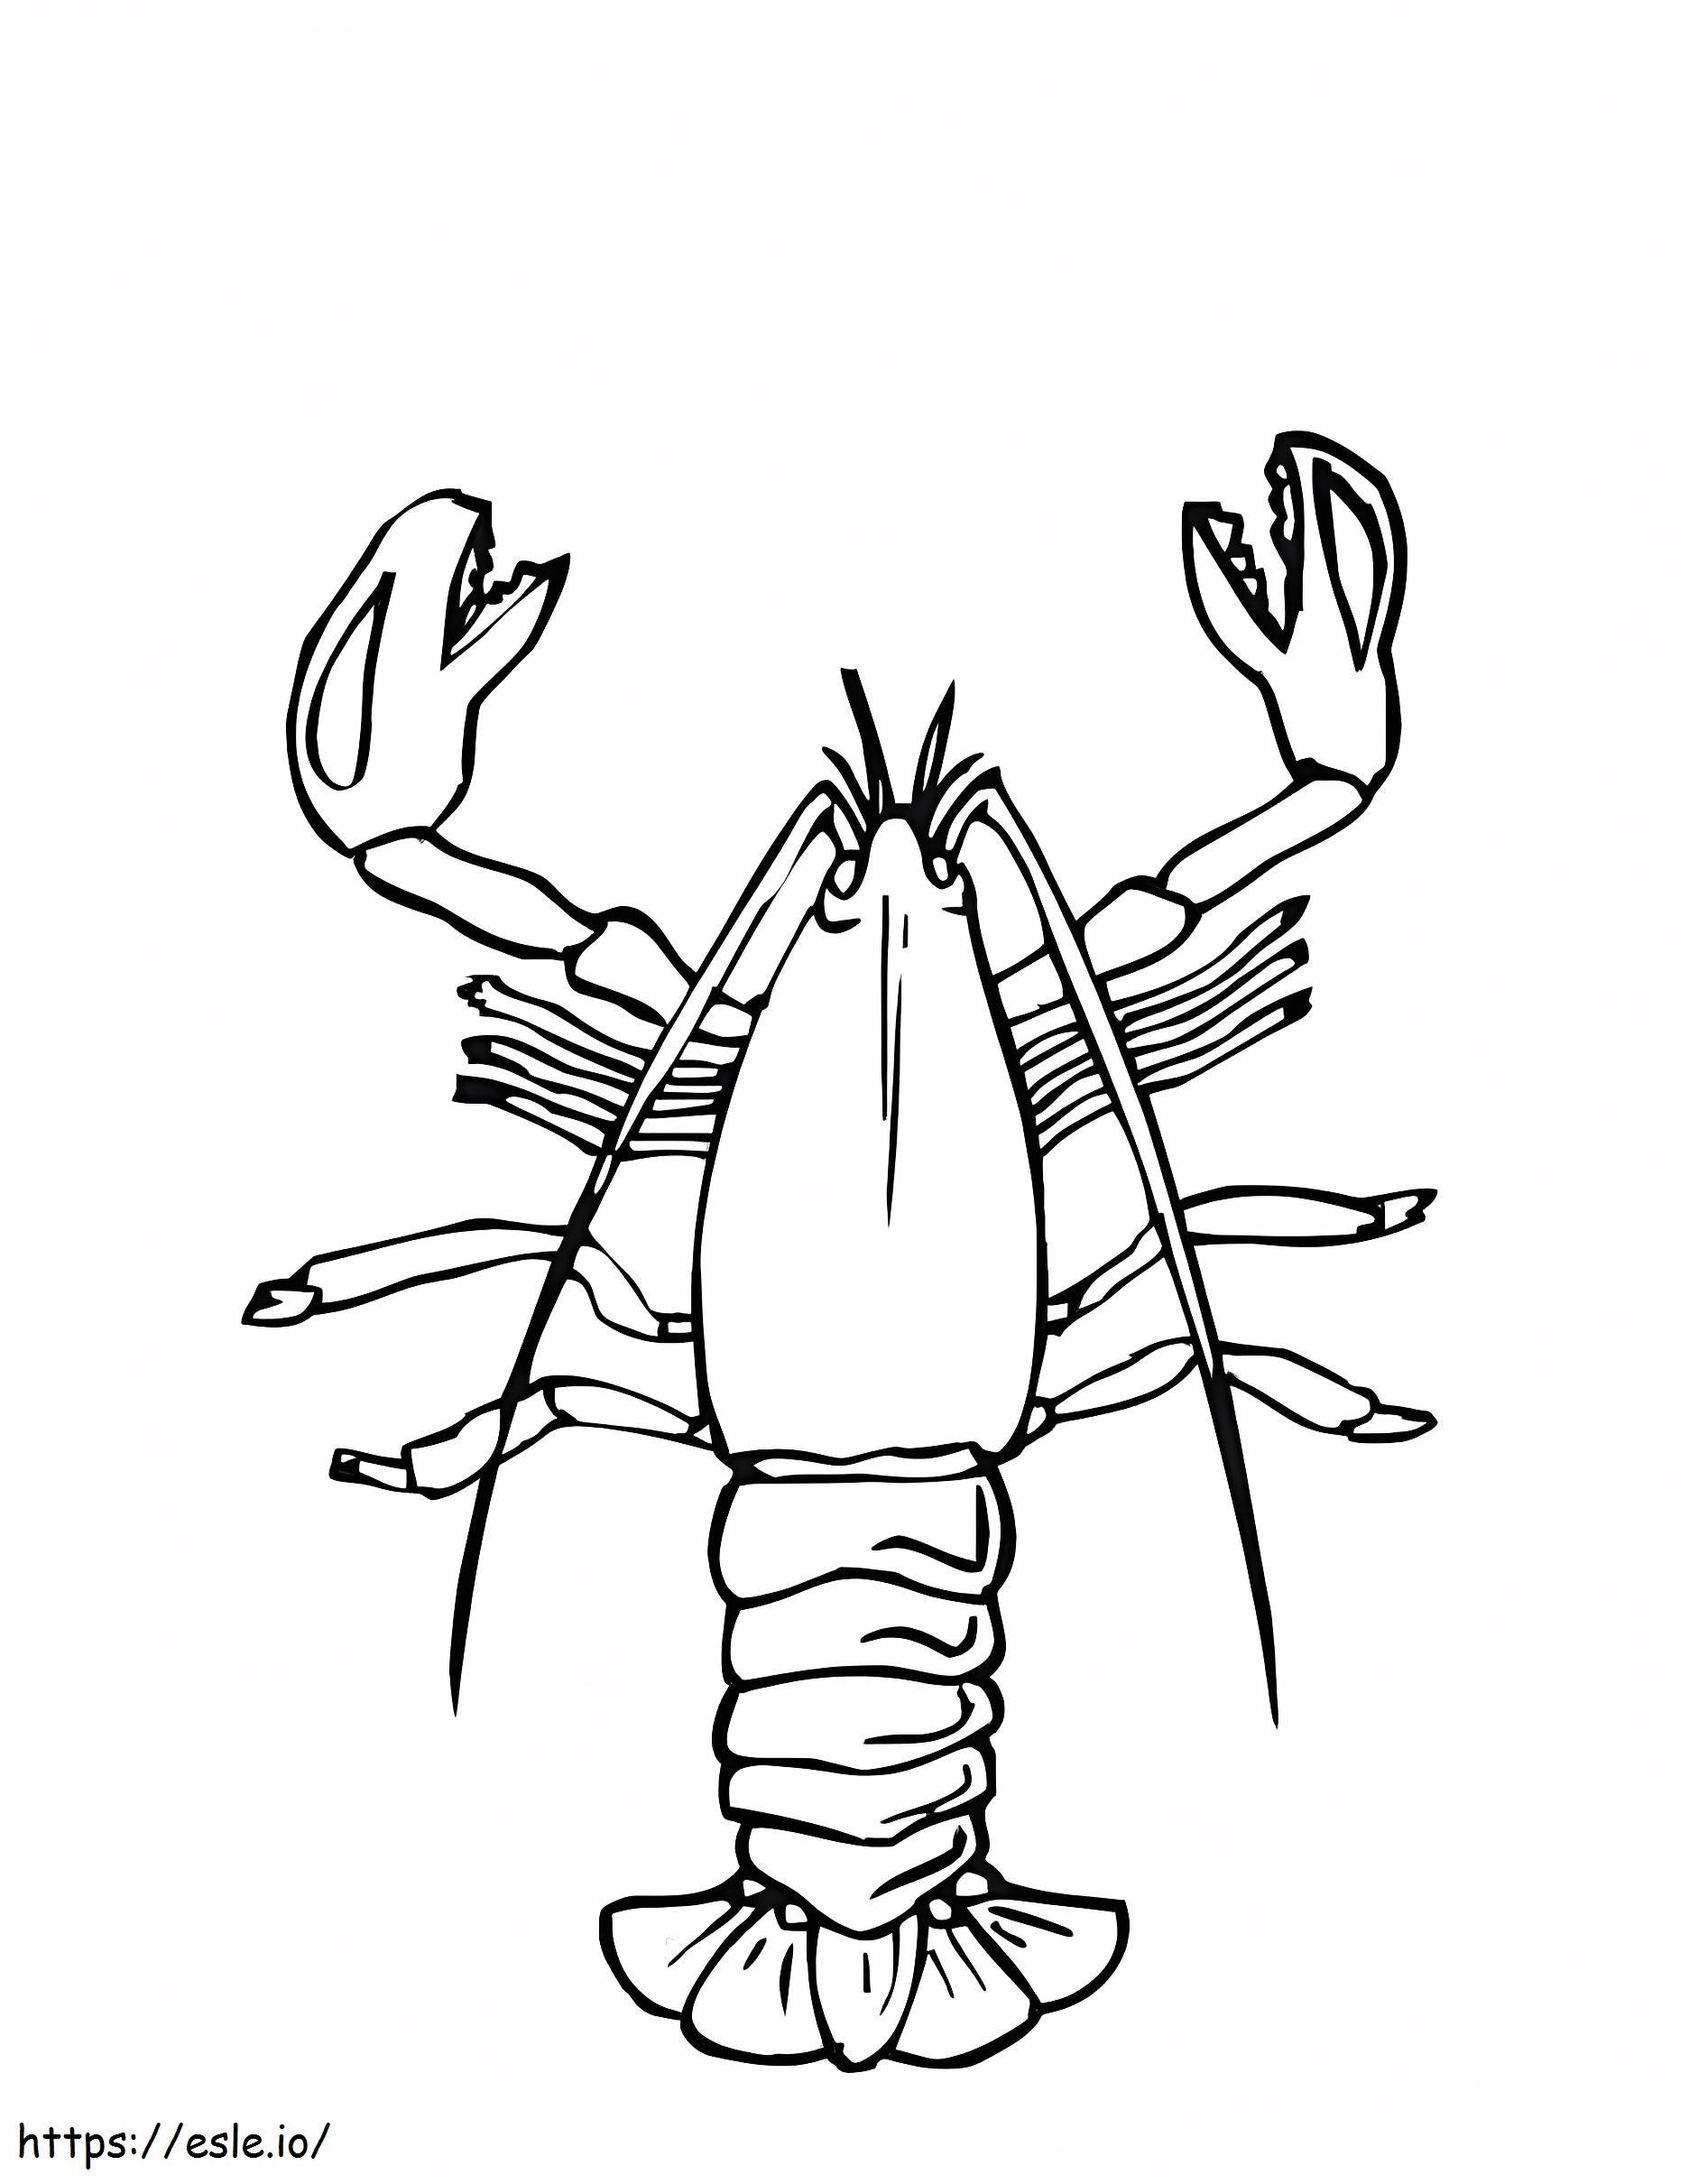 Big Lobster coloring page